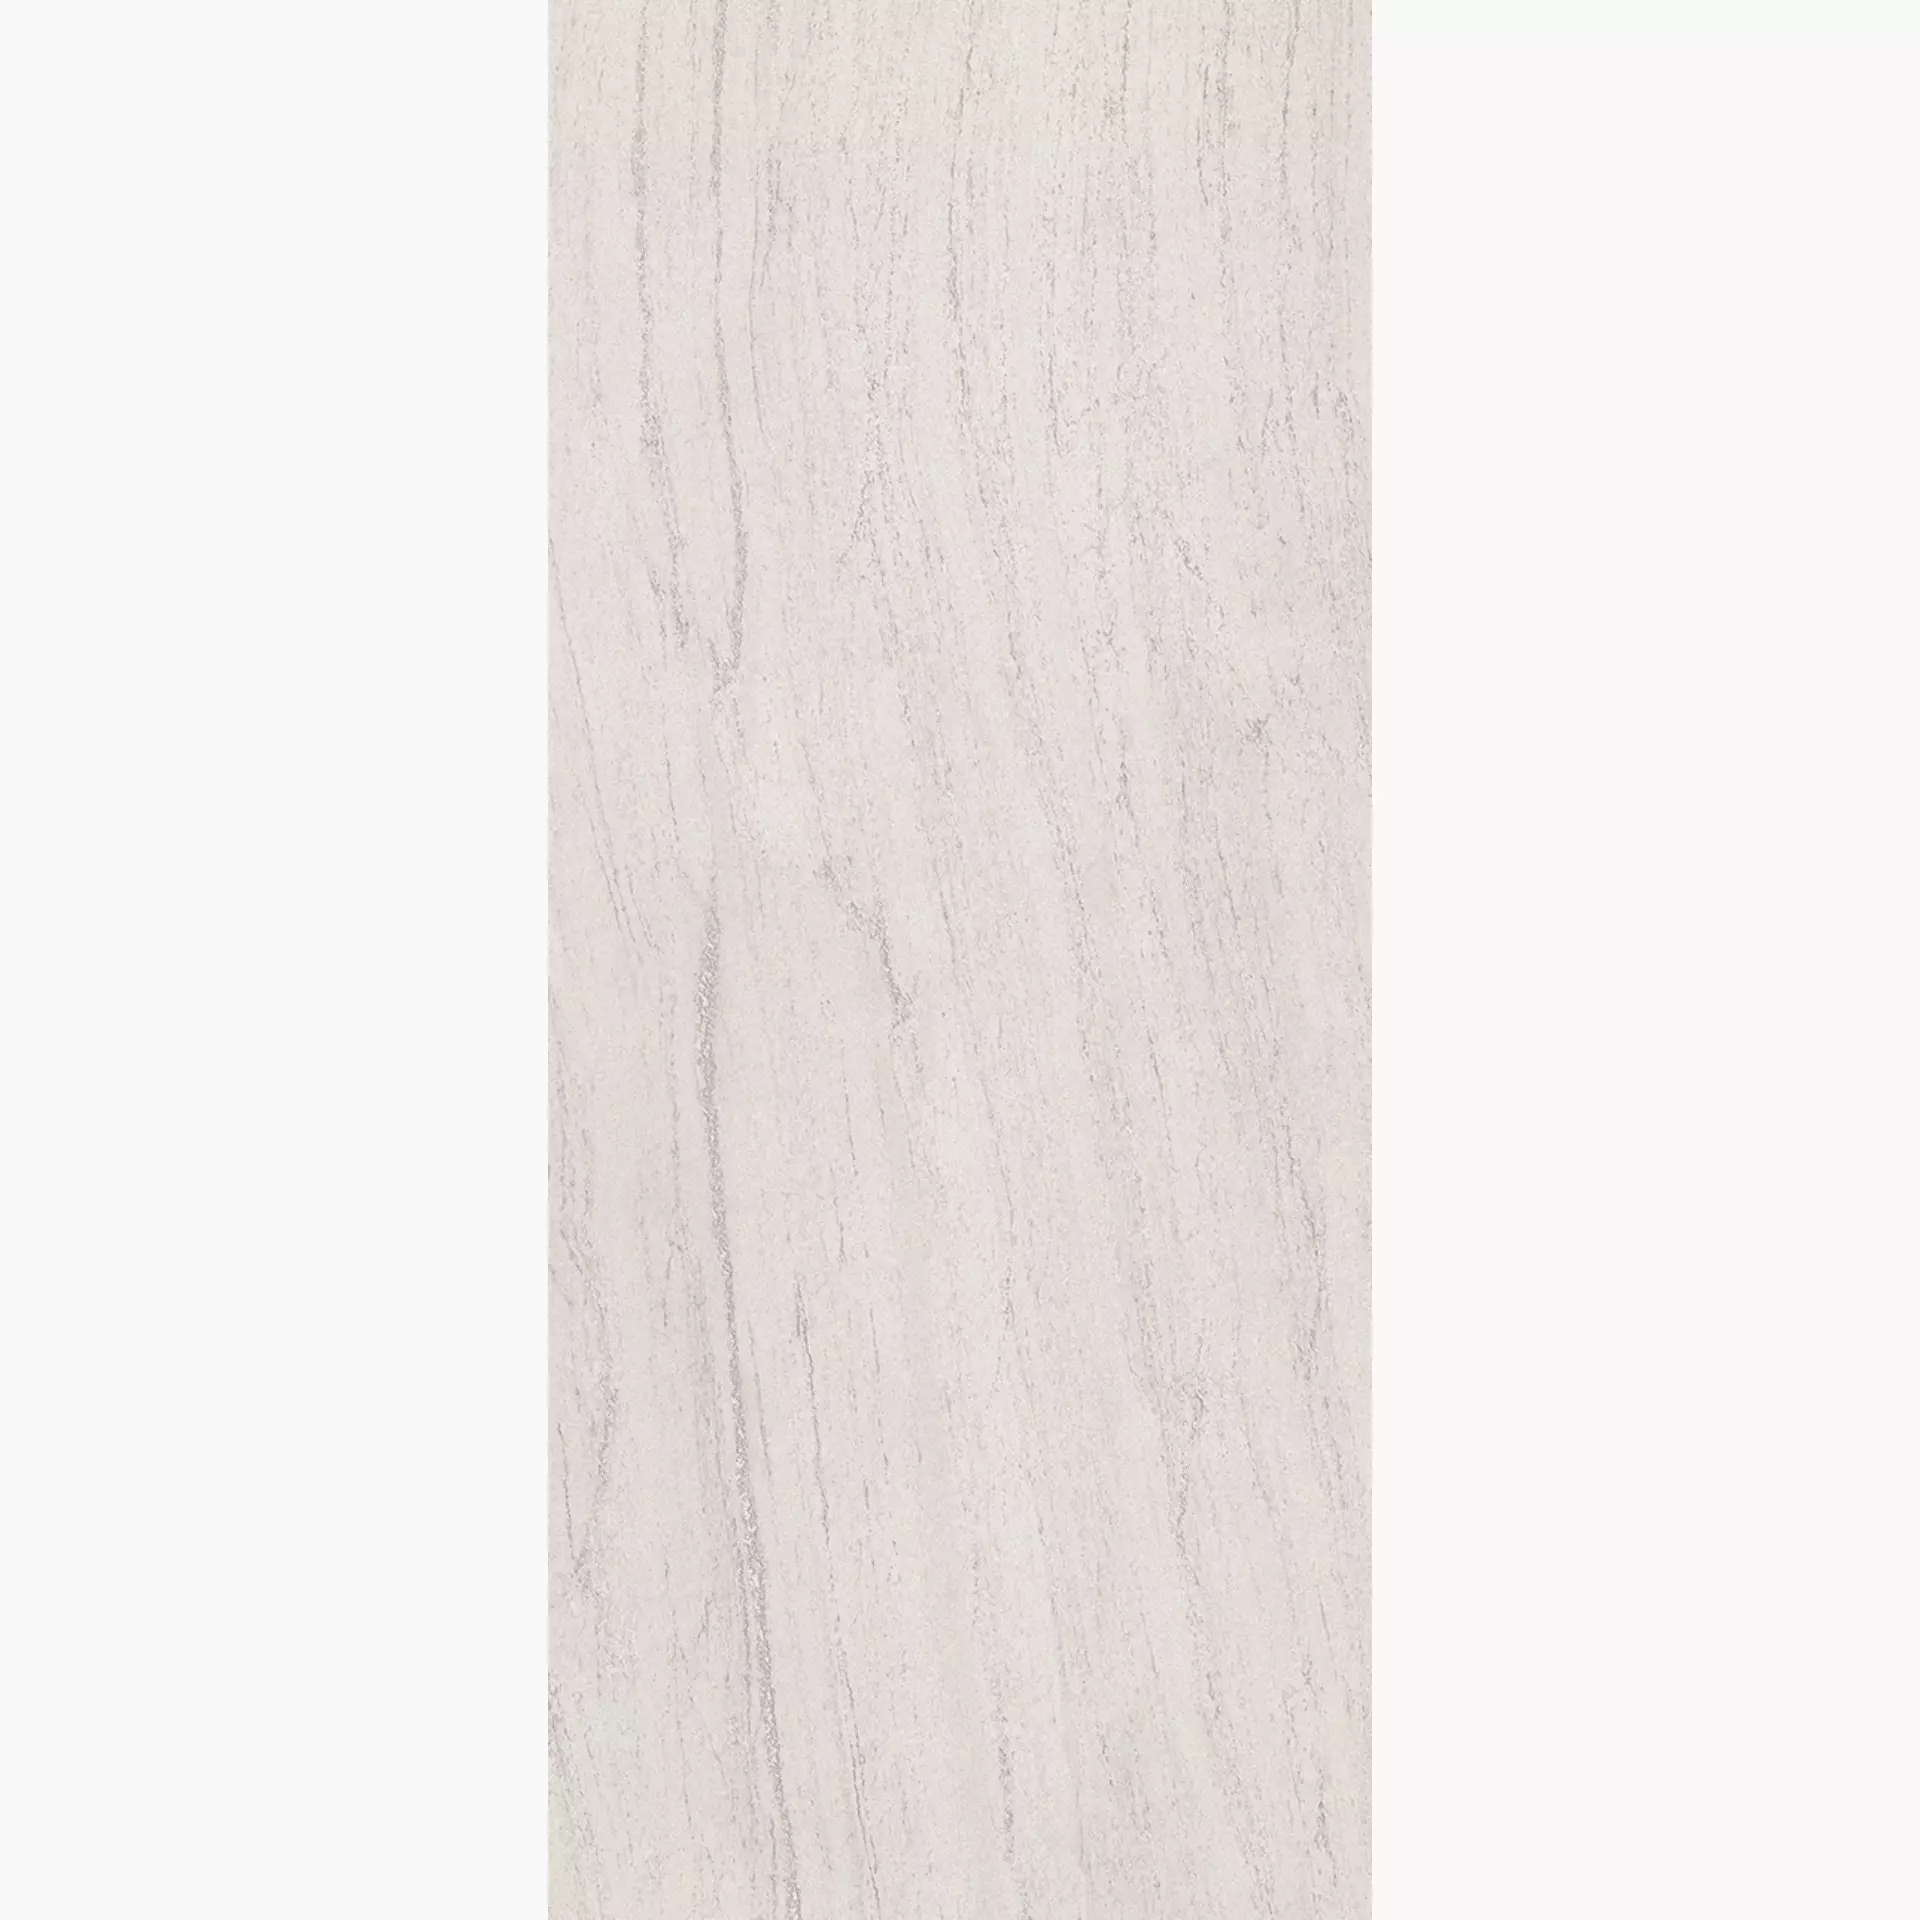 Coem Wide Gres White Levigato Granito Effect 0GR281L 120x280cm rectified 6mm